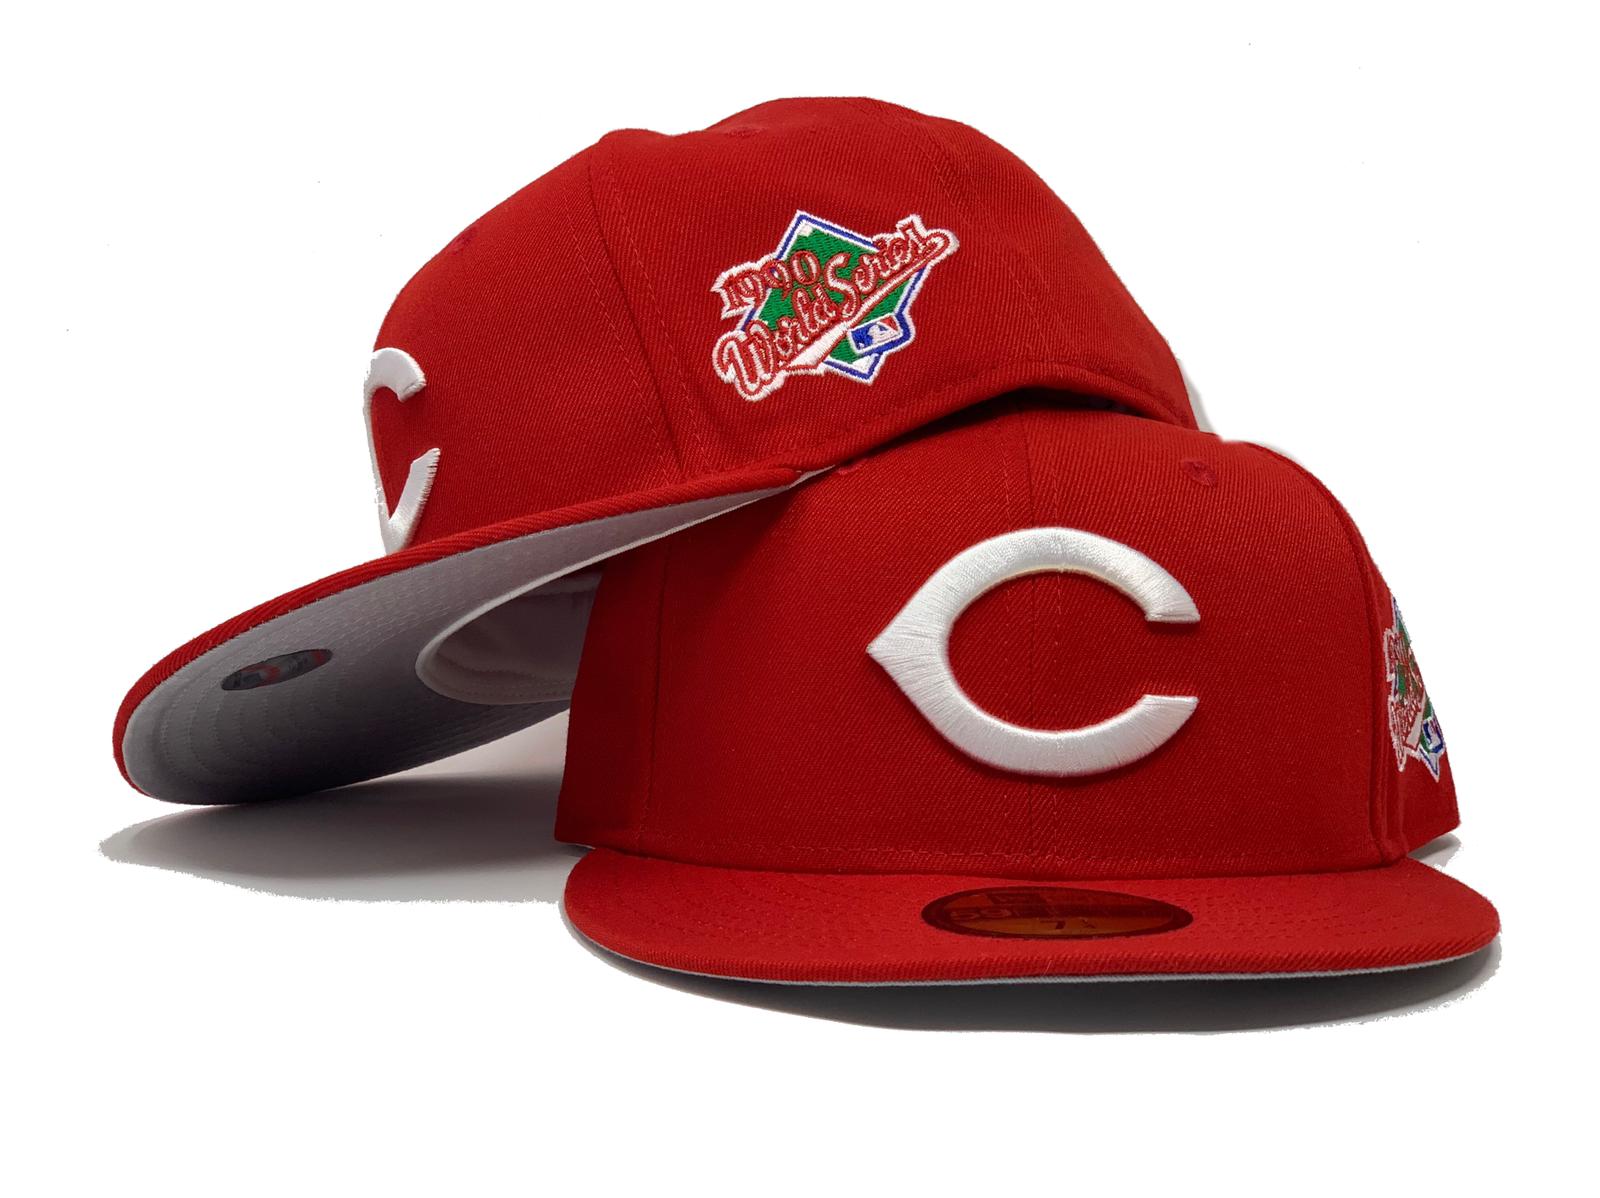 Cincinnati Reds 1990 World Series New Era 59FIFTY Fitted Hats (Red Gray Under BRIM) - Reds Coopers Town Fitteds – Retro Reds Green Underbrim 5950 Caps